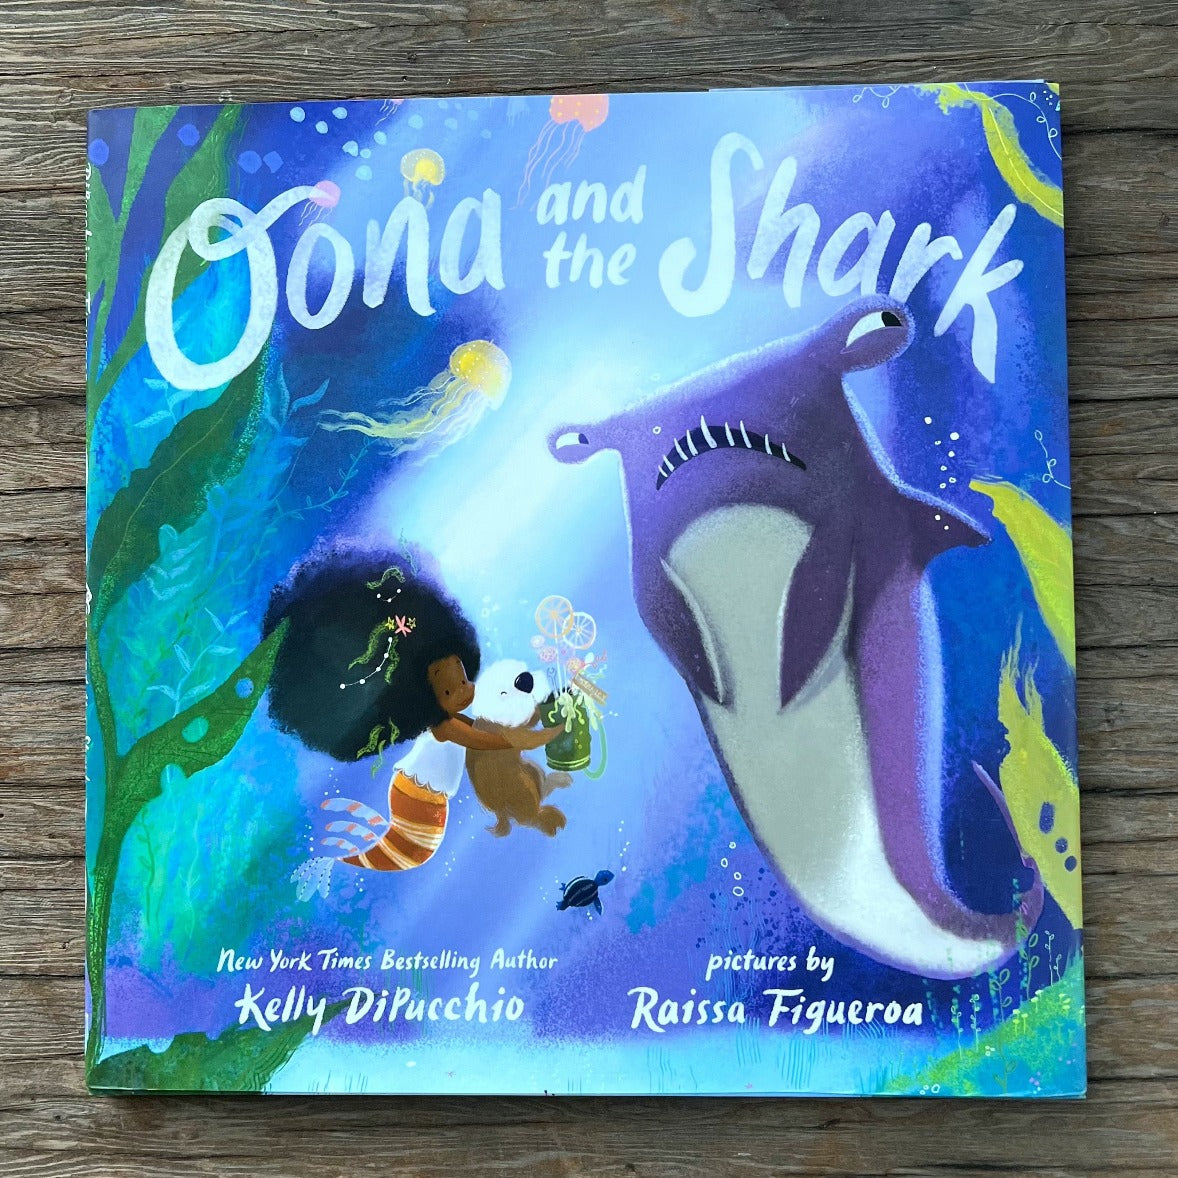 Oona and the Shark by Kelly Dipucchio